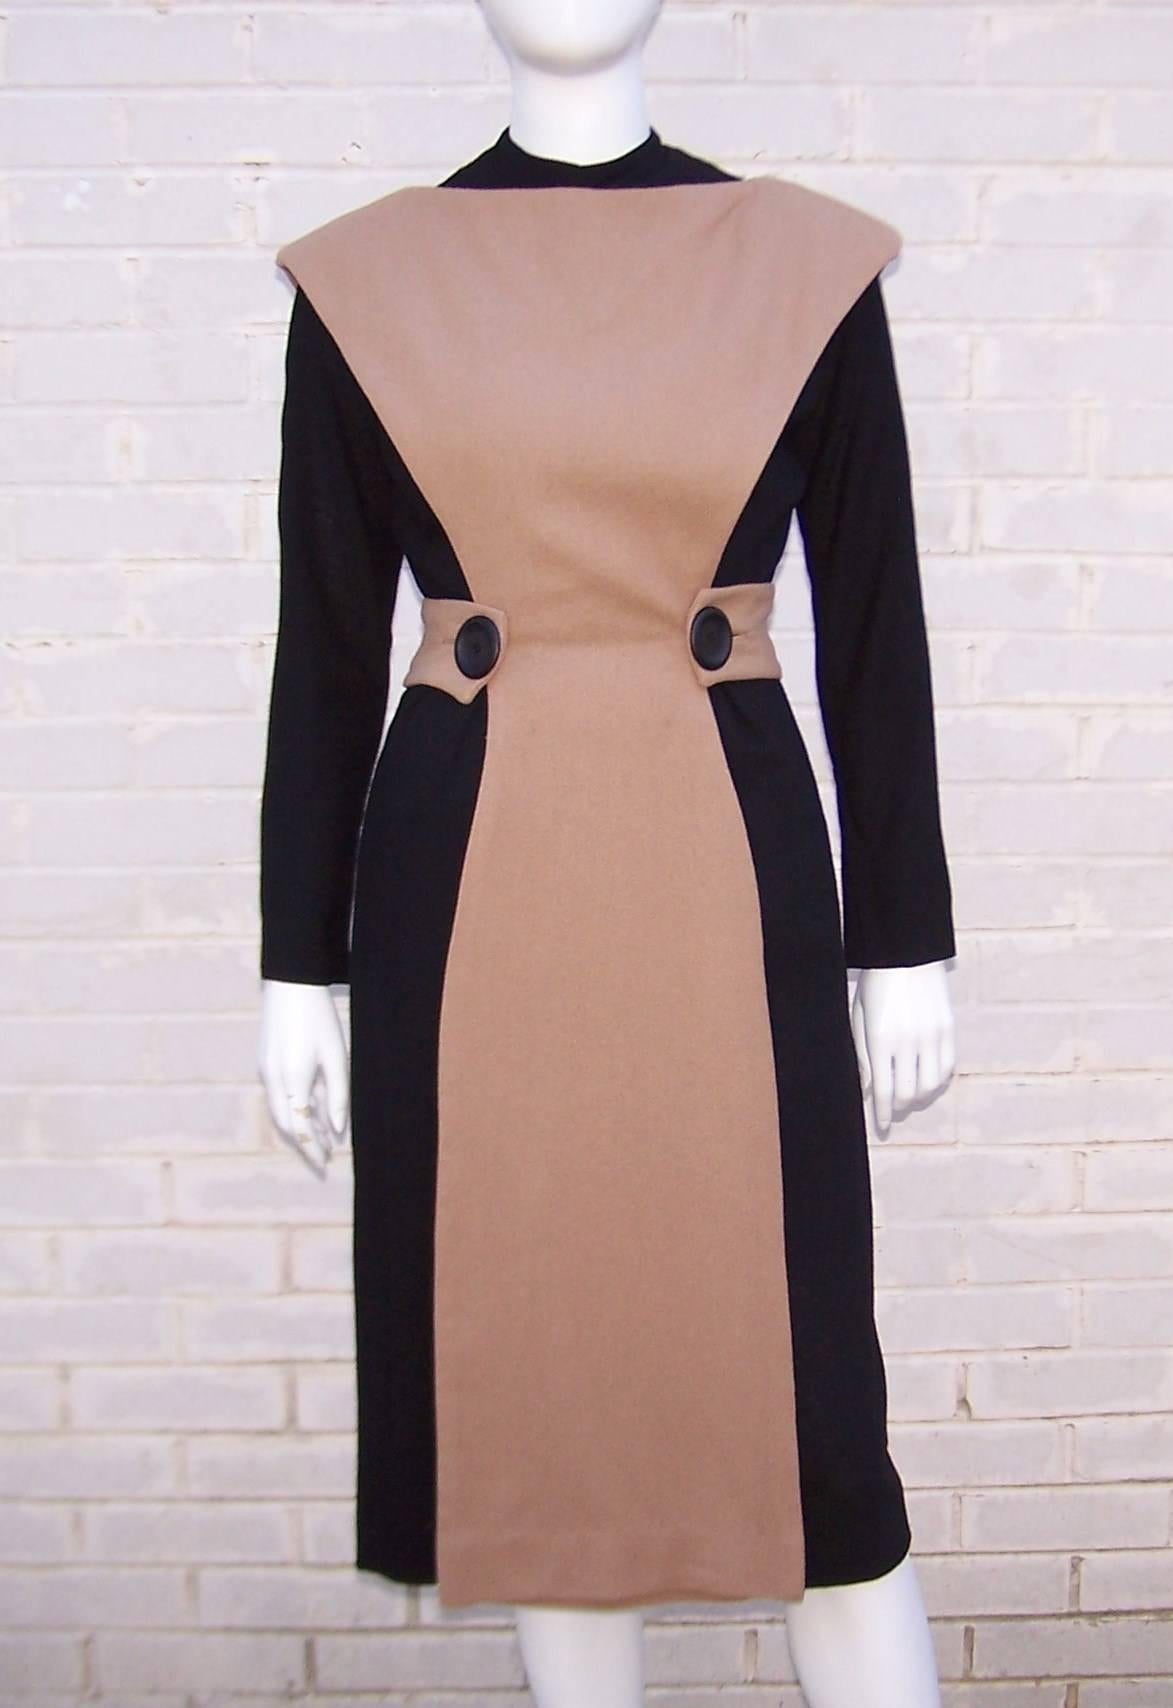 This 1950's dress conjures up images of Katherine Hepburn in The Desk Set...classic 1950's silhouette with a serious 'sexy secretary' vibe.  It is really two outfits in one starting with a black mock turtleneck wiggle dress which zips and hooks at